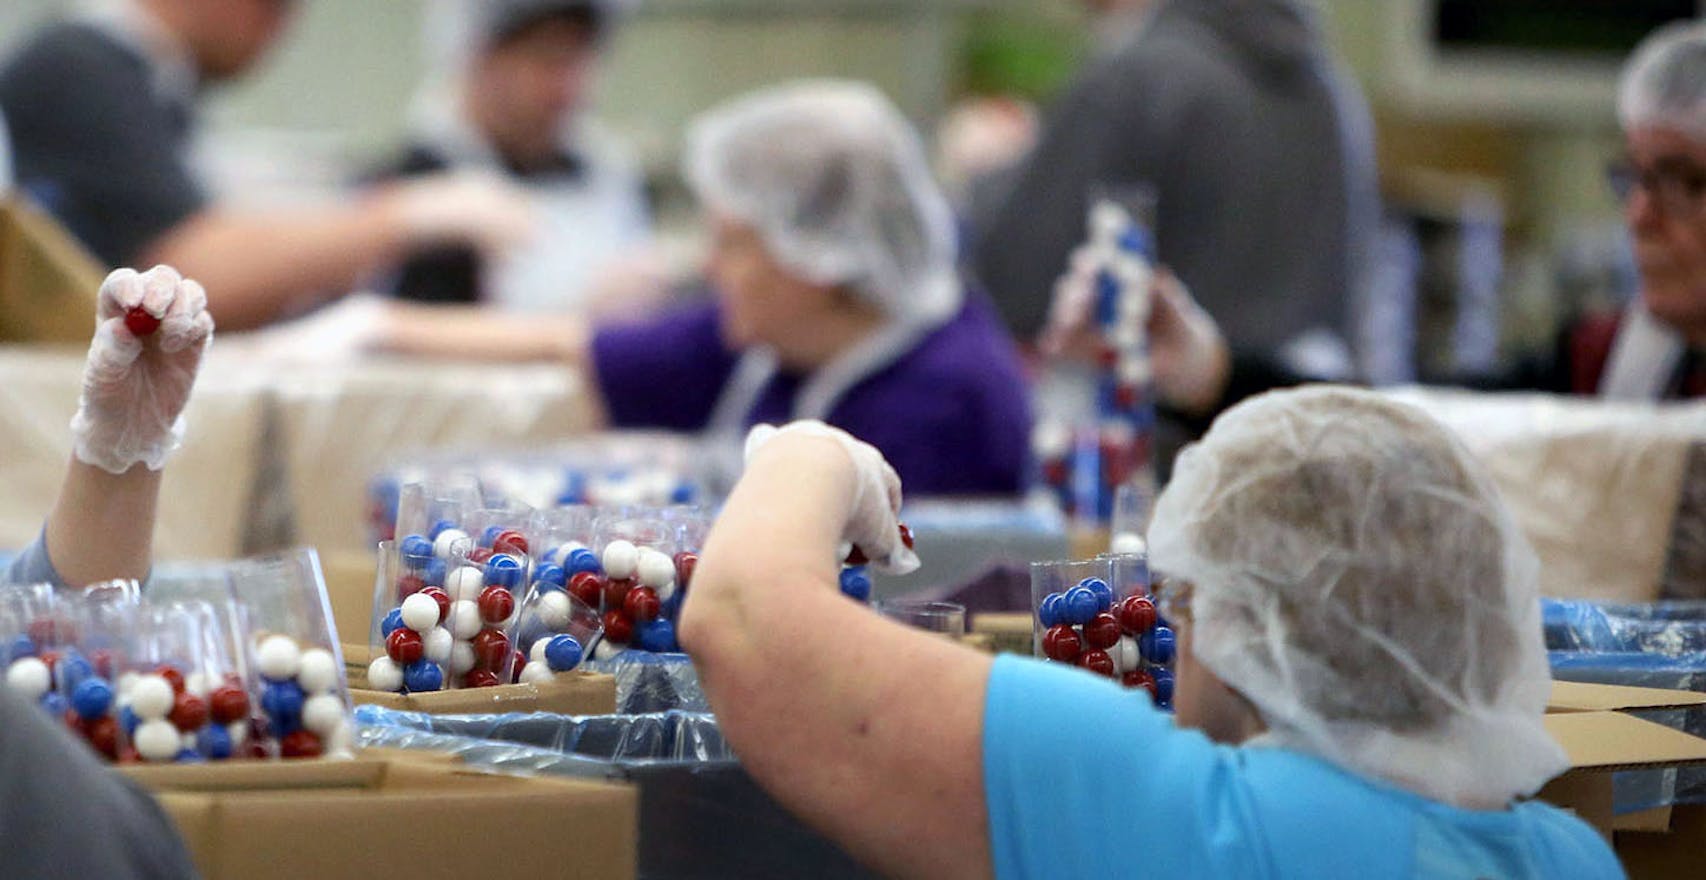 Employees filled tubes with colored gumballs at a sheltered workshop in Fairmont, Minn., where their pay is based on speed and productivity. Workers at state-subsidized sheltered workshops in Minnesota made an average of $4.05 an hour last year.